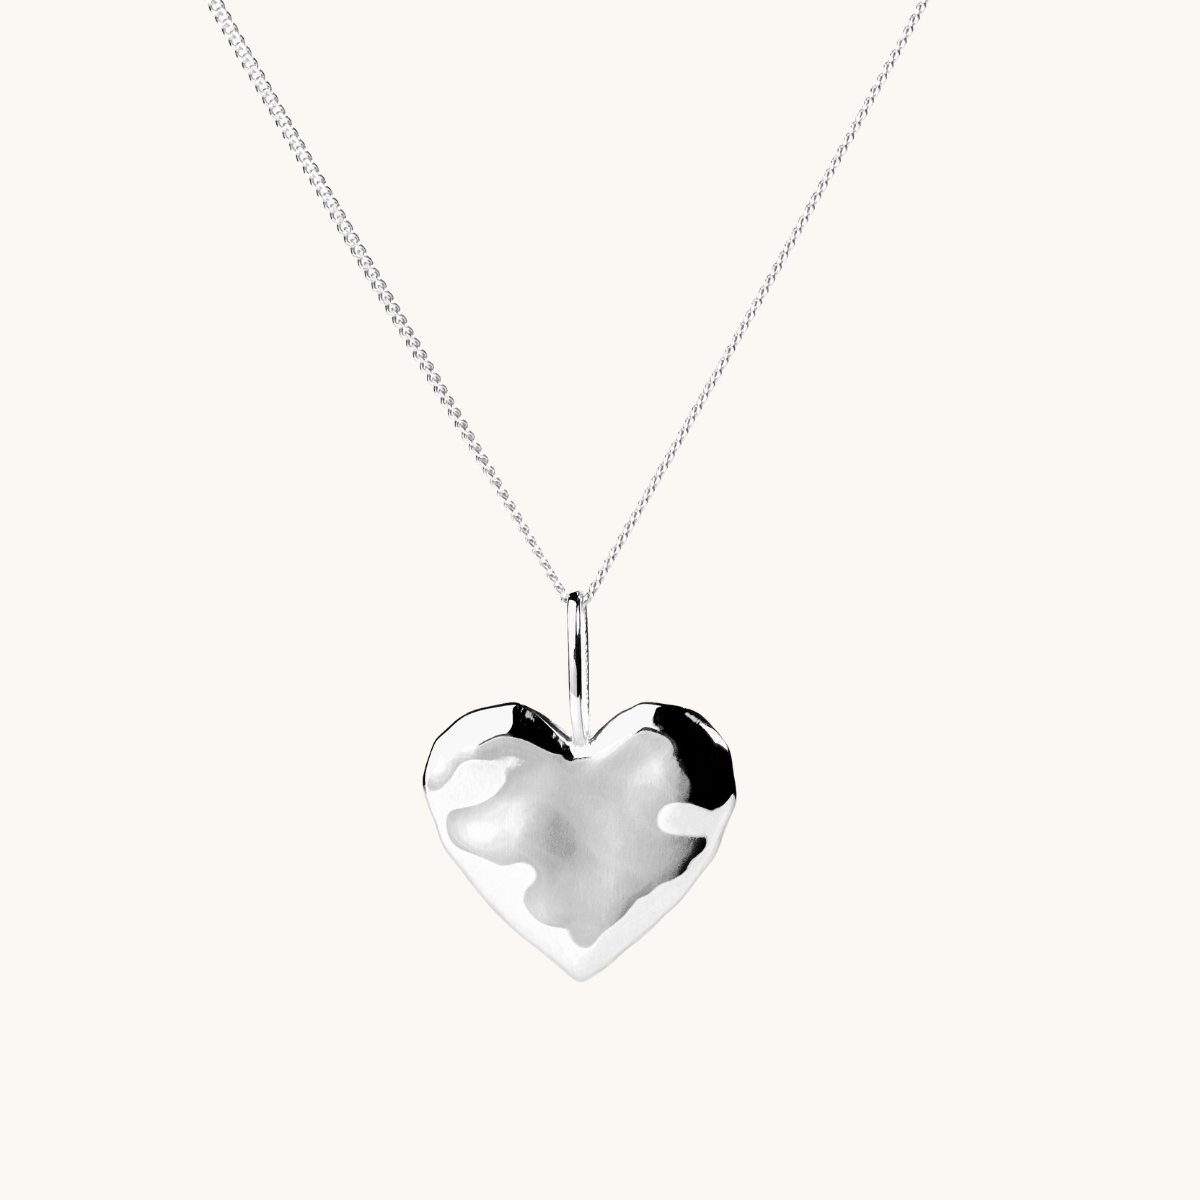 A silver heart necklace with an organic shape